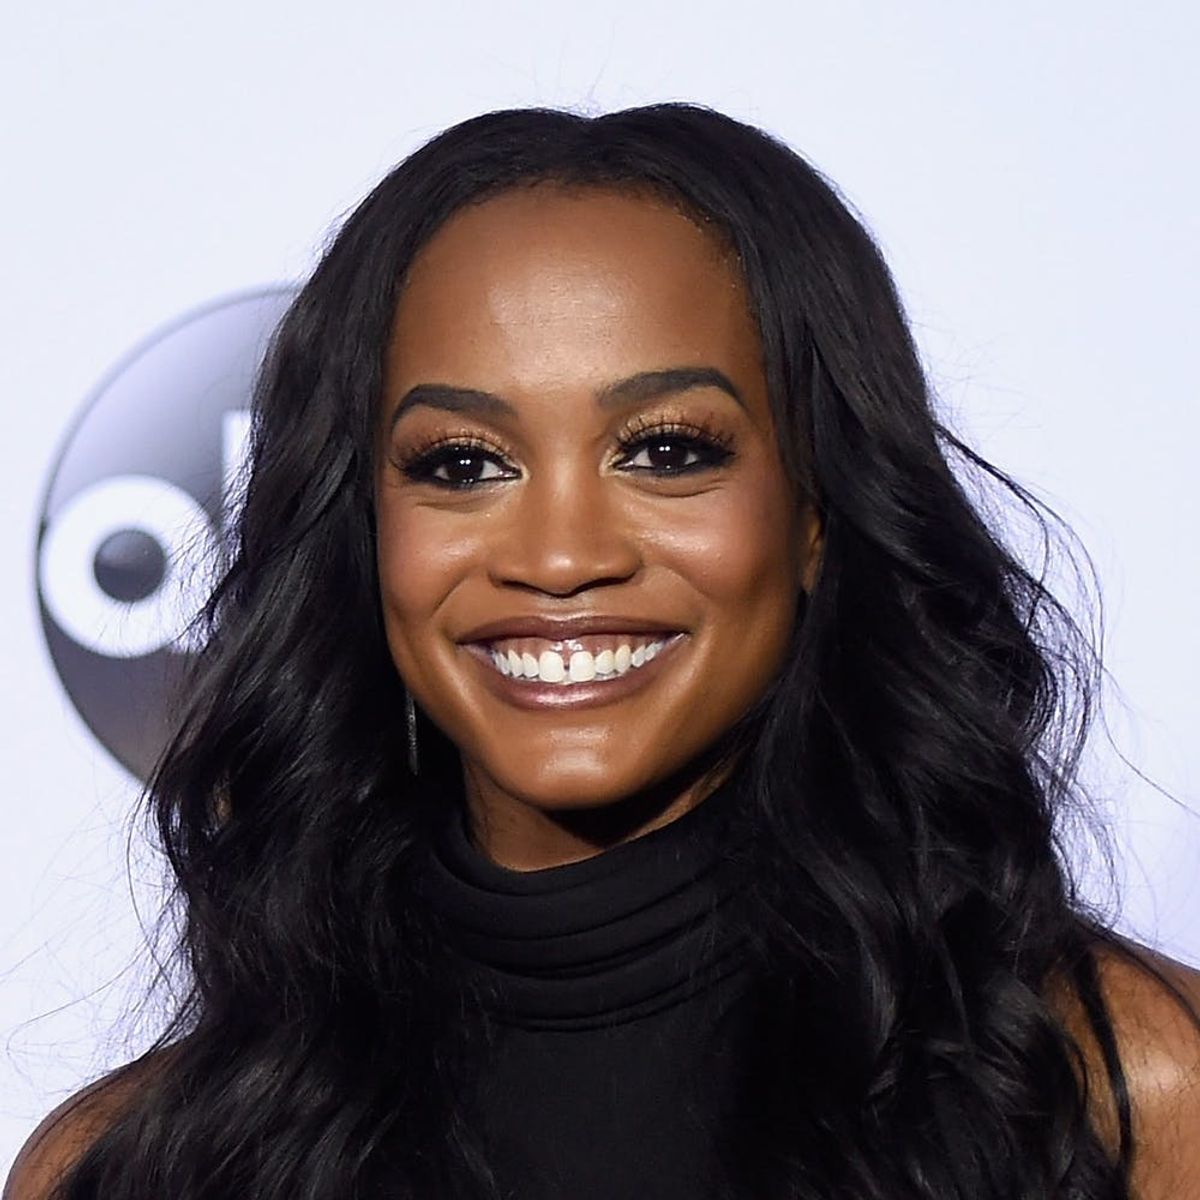 Rachel Lindsay’s Bachelorette Premiere Gown Weighed 30 Freakin’ Pounds